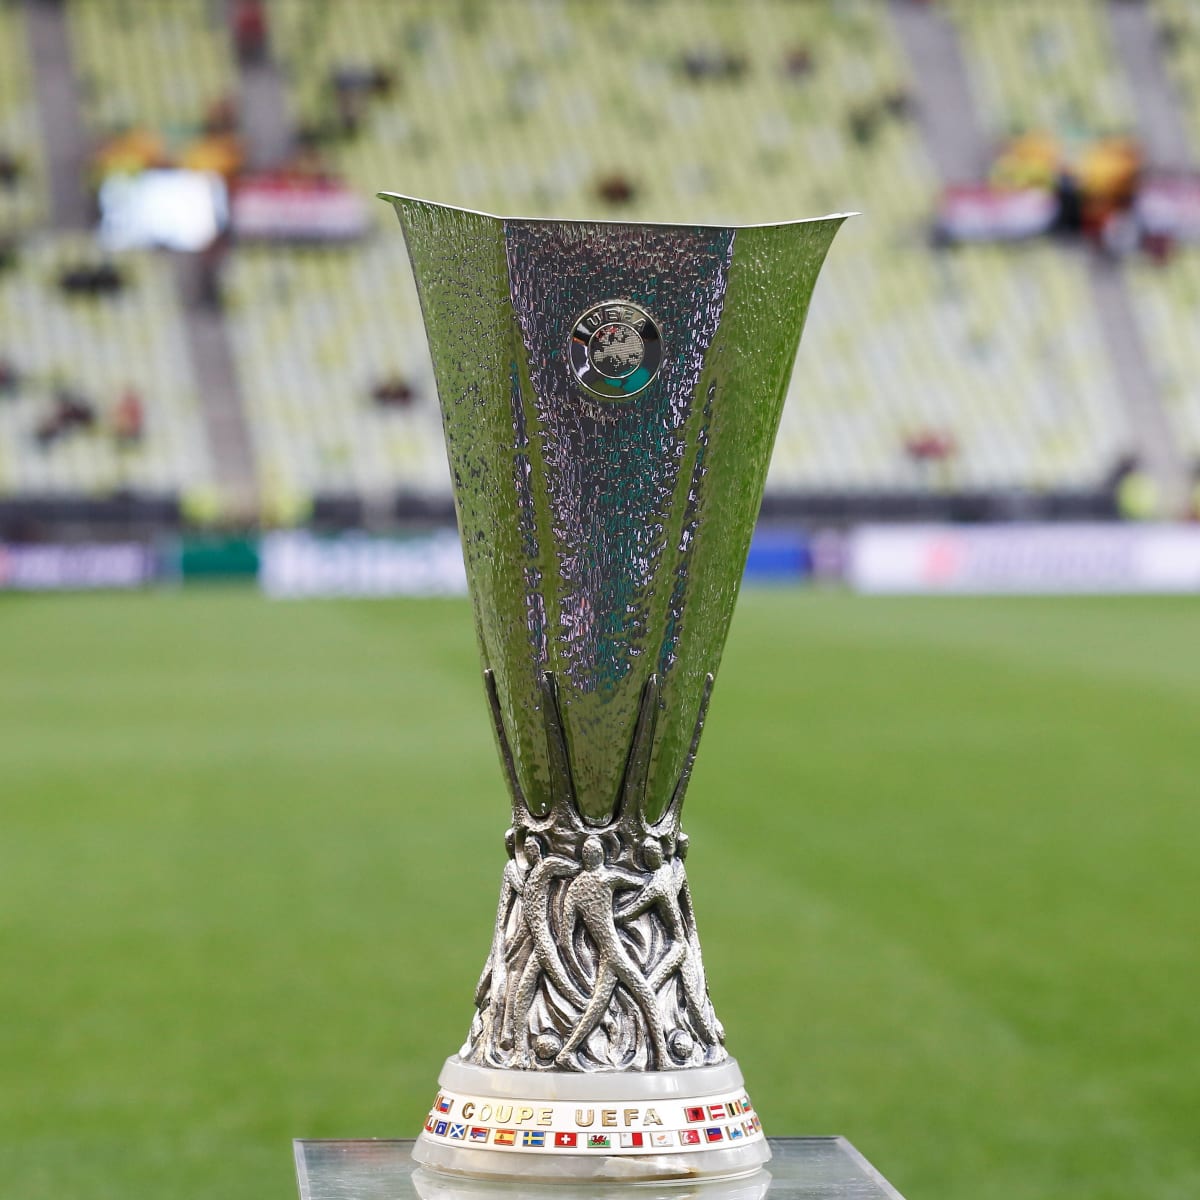 Europa League quarter-final draw start time and how to watch